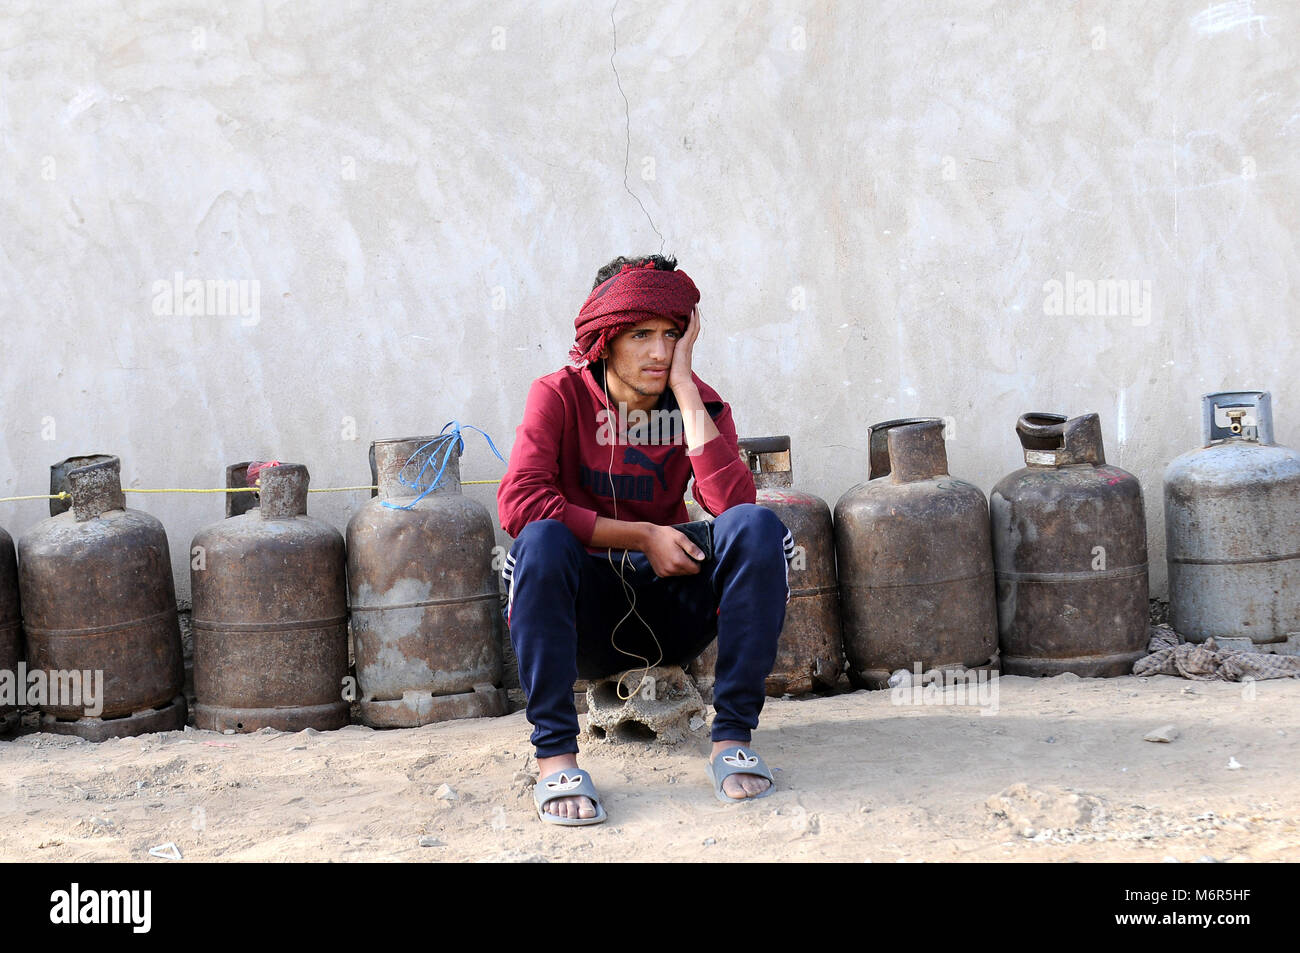 Sanaa, Yemen. 5th Mar, 2018. A man waits for gas supplies next to empty cooking gas cylinders at a gas station in Sanaa, Yemen, on March 5, 2018. Yemen experienced severe cooking gas shortage since the Saudi-led coalition started a military campaign against Houthis rebels. Credit: Mohammed Mohammed/Xinhua/Alamy Live News Stock Photo